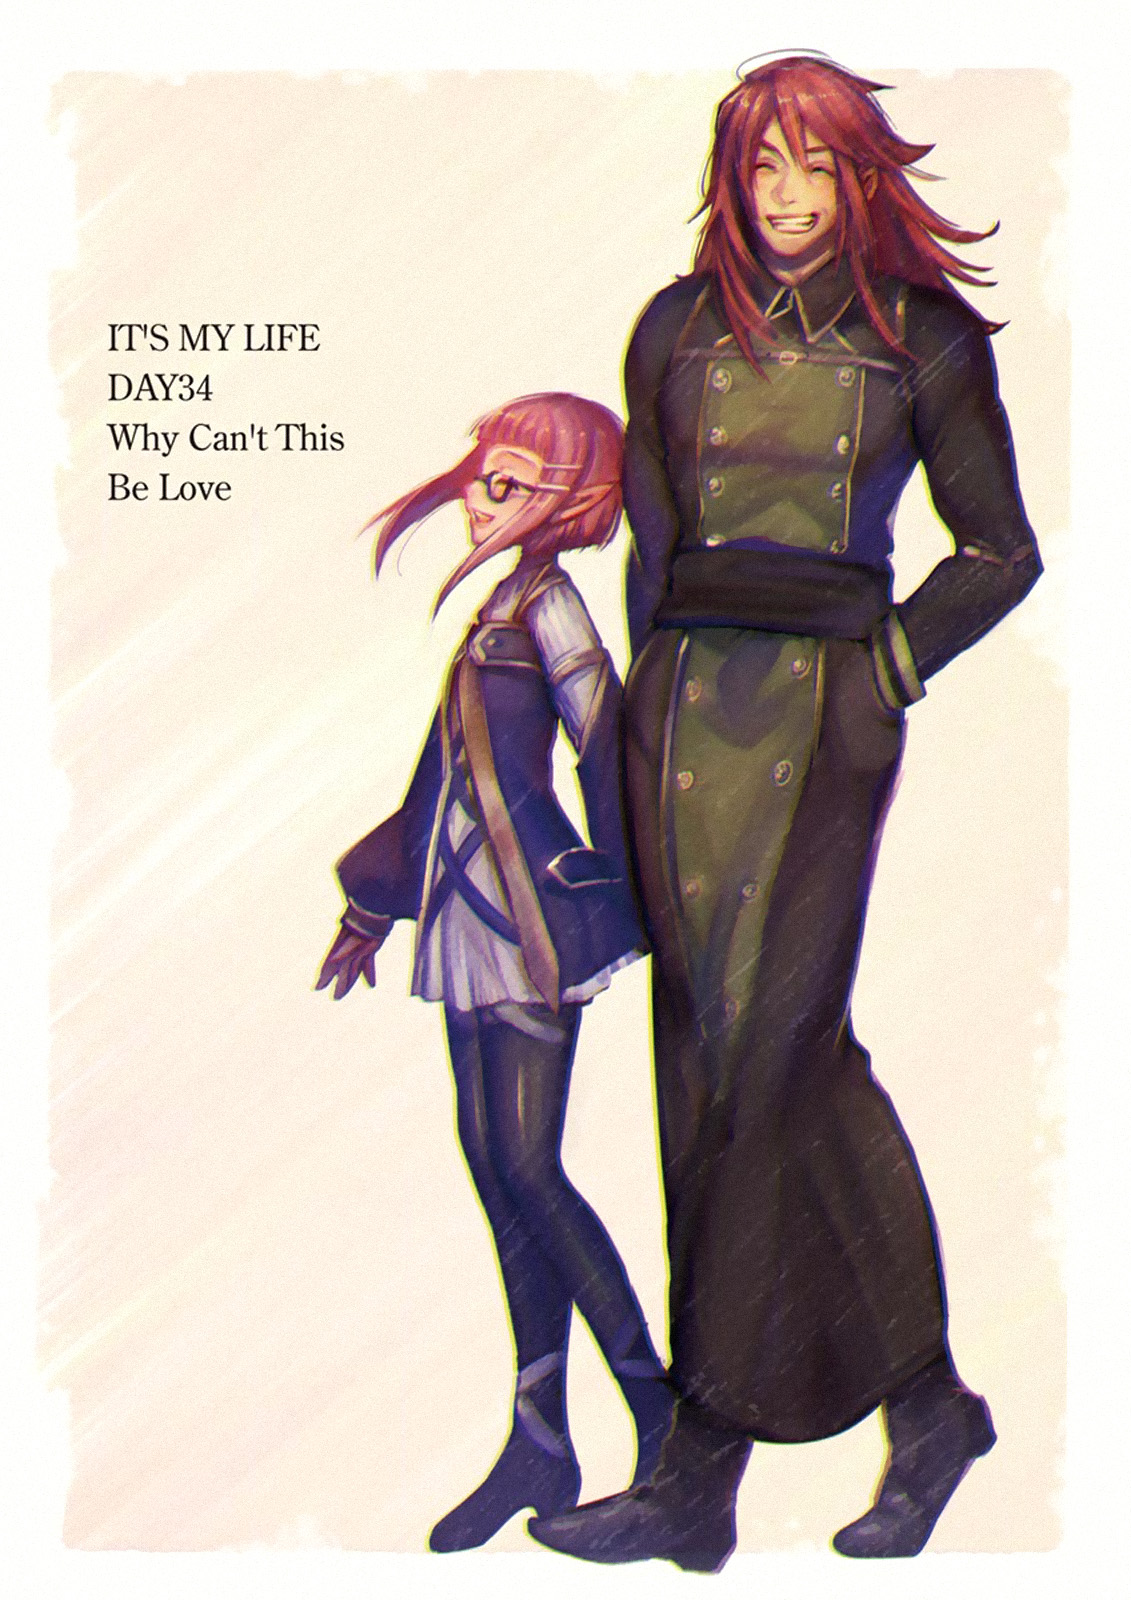 It's My Life Vol. 5 Ch. 34 Why Can't This Be Love